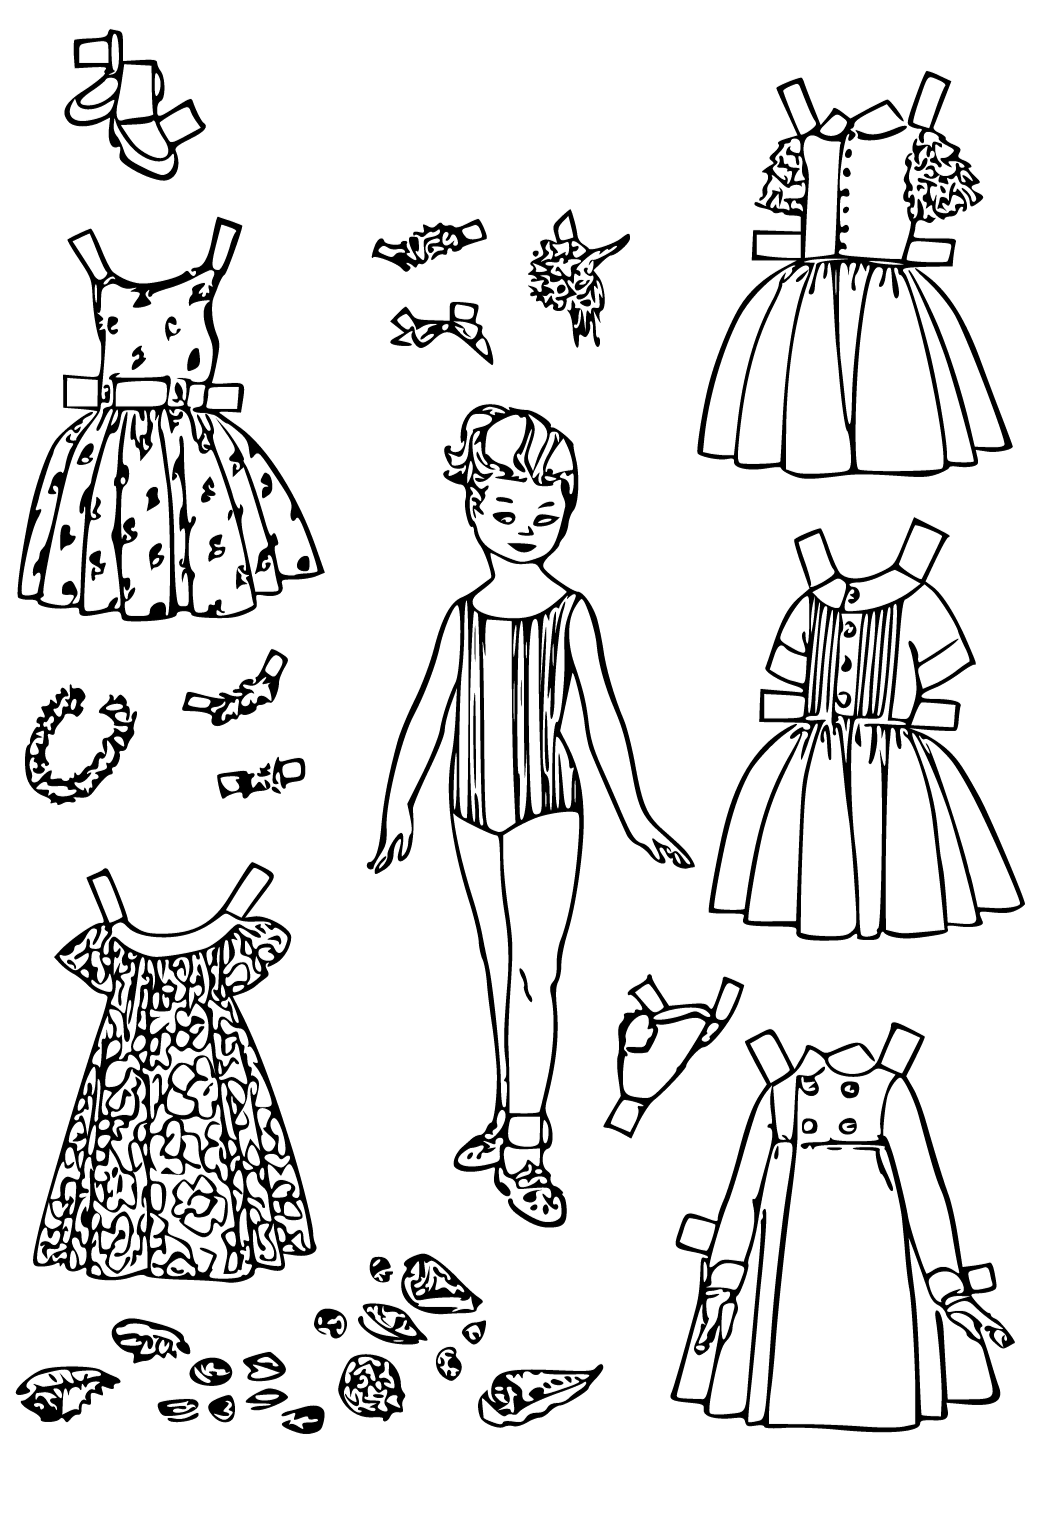 Free printable paper doll summer coloring page for adults and kids